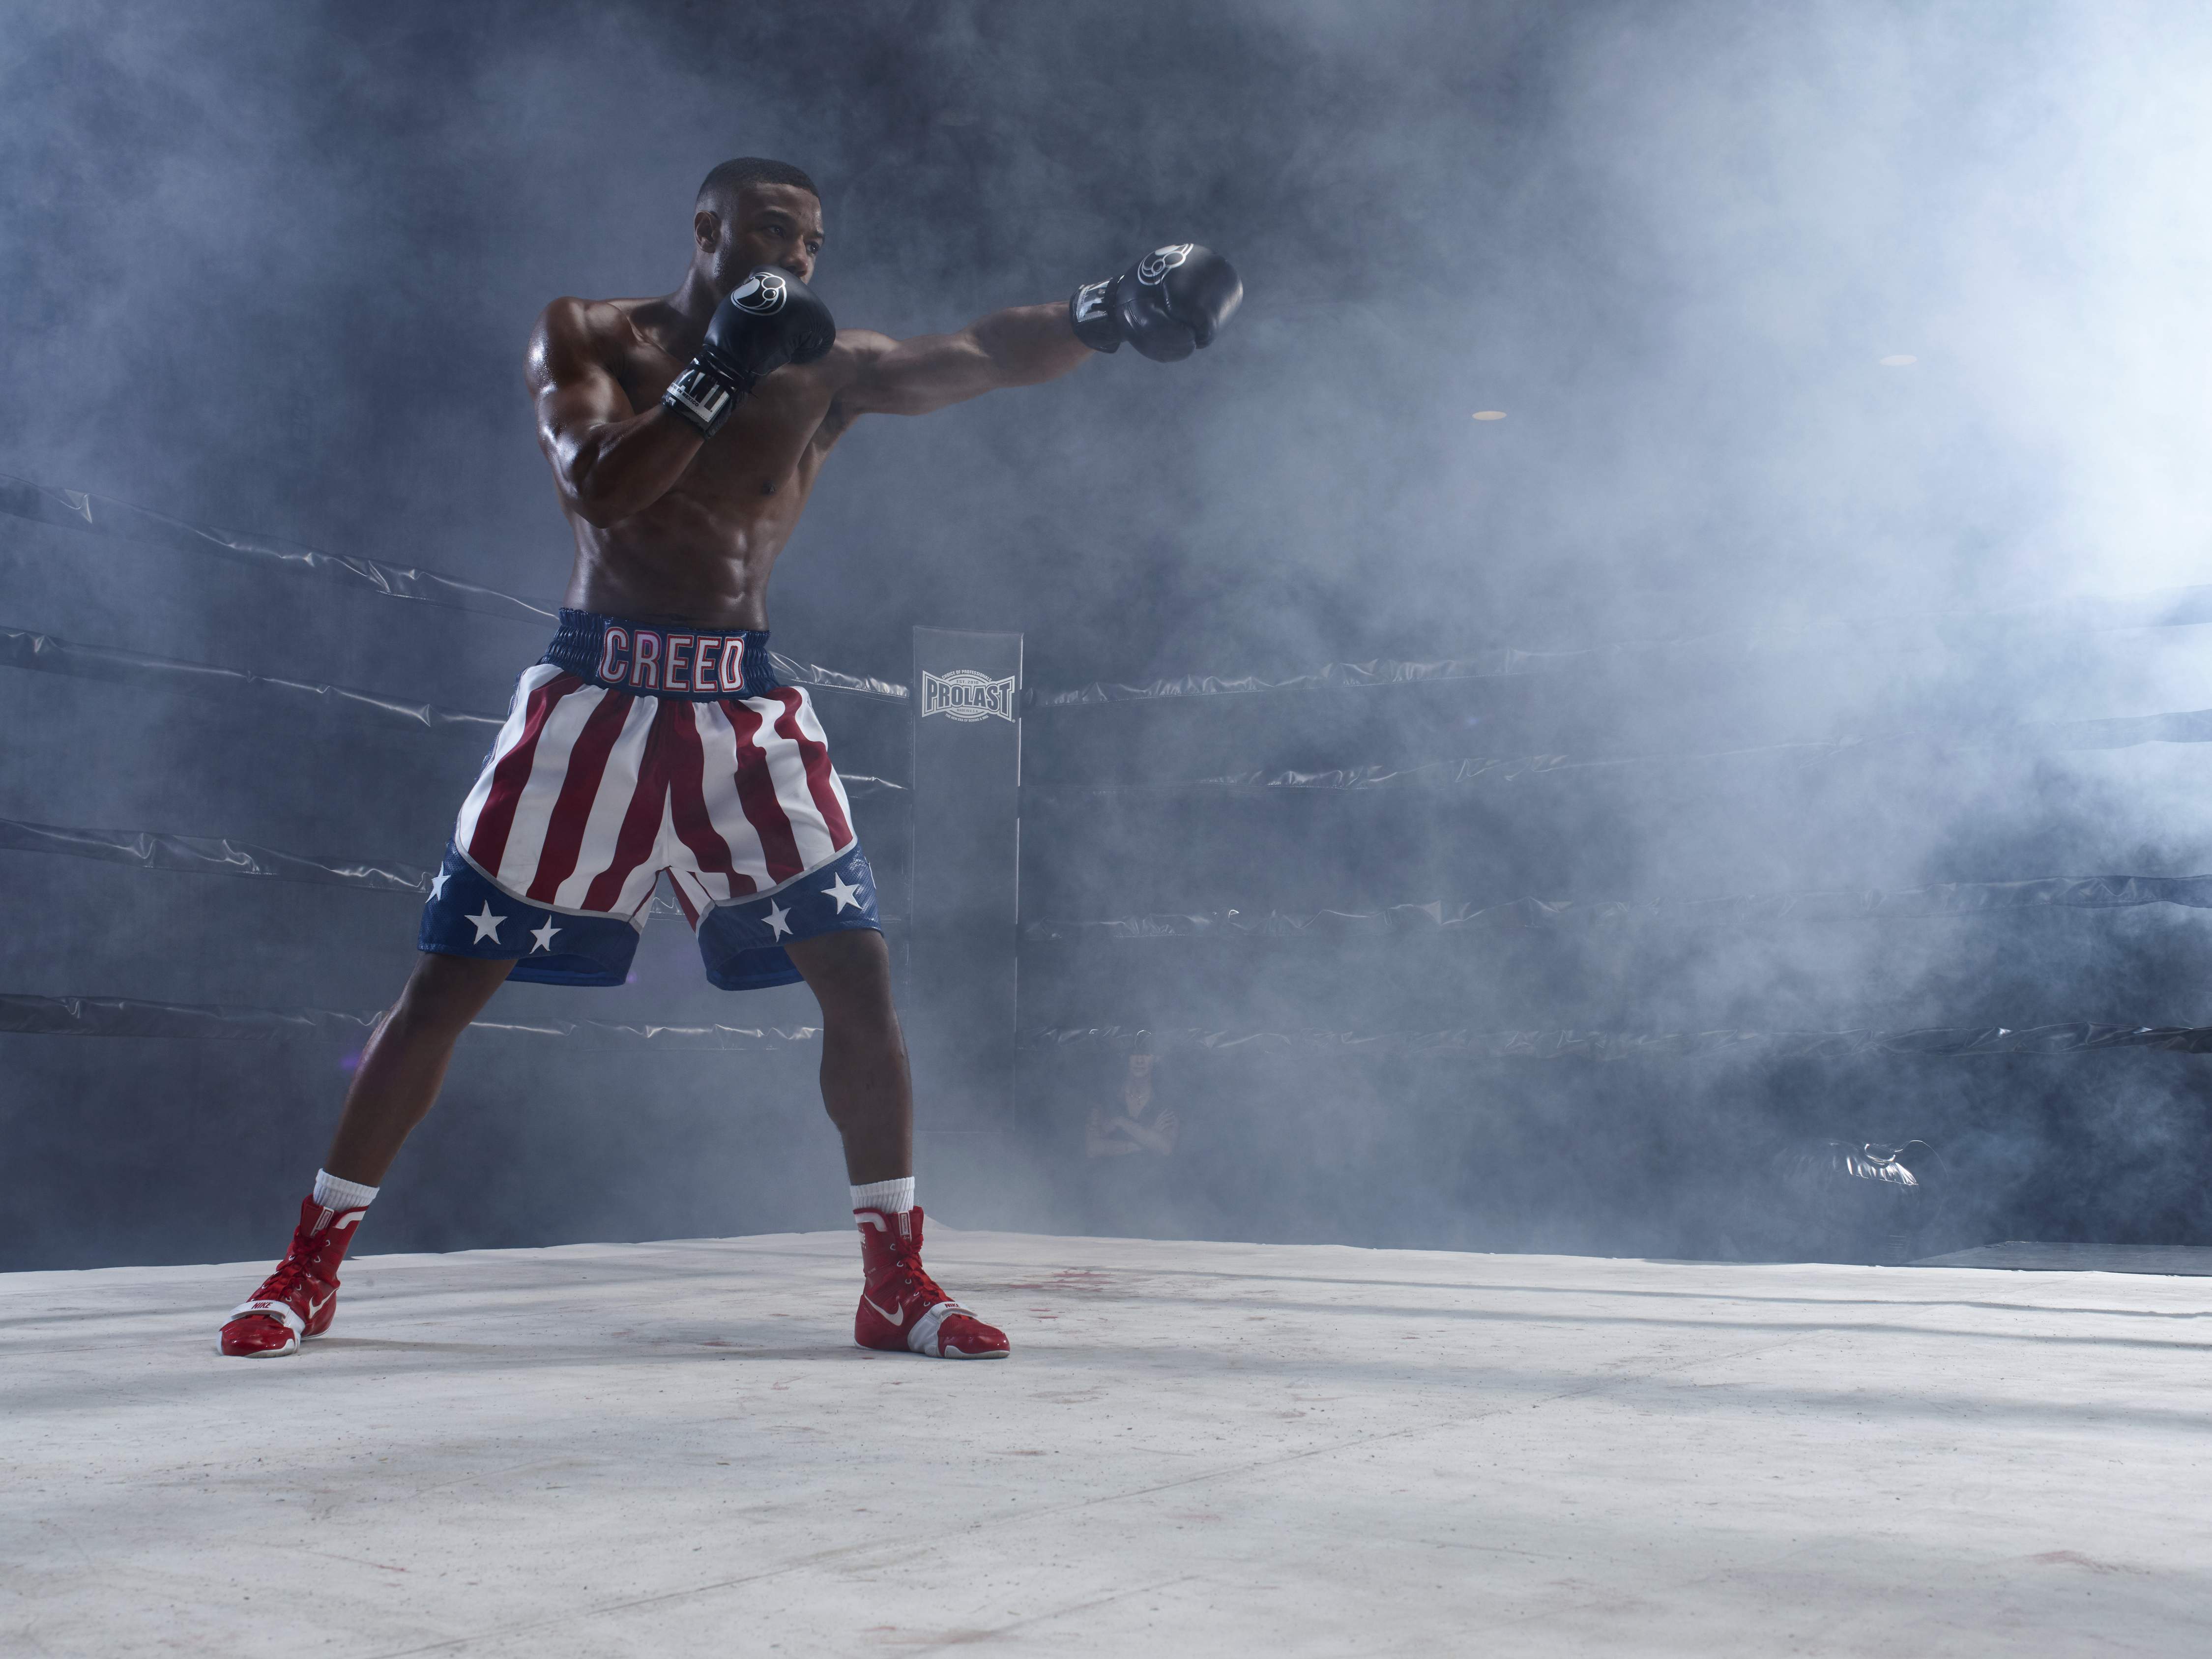 Fairly enjoyable, consistently predictable, 'Creed II' is more